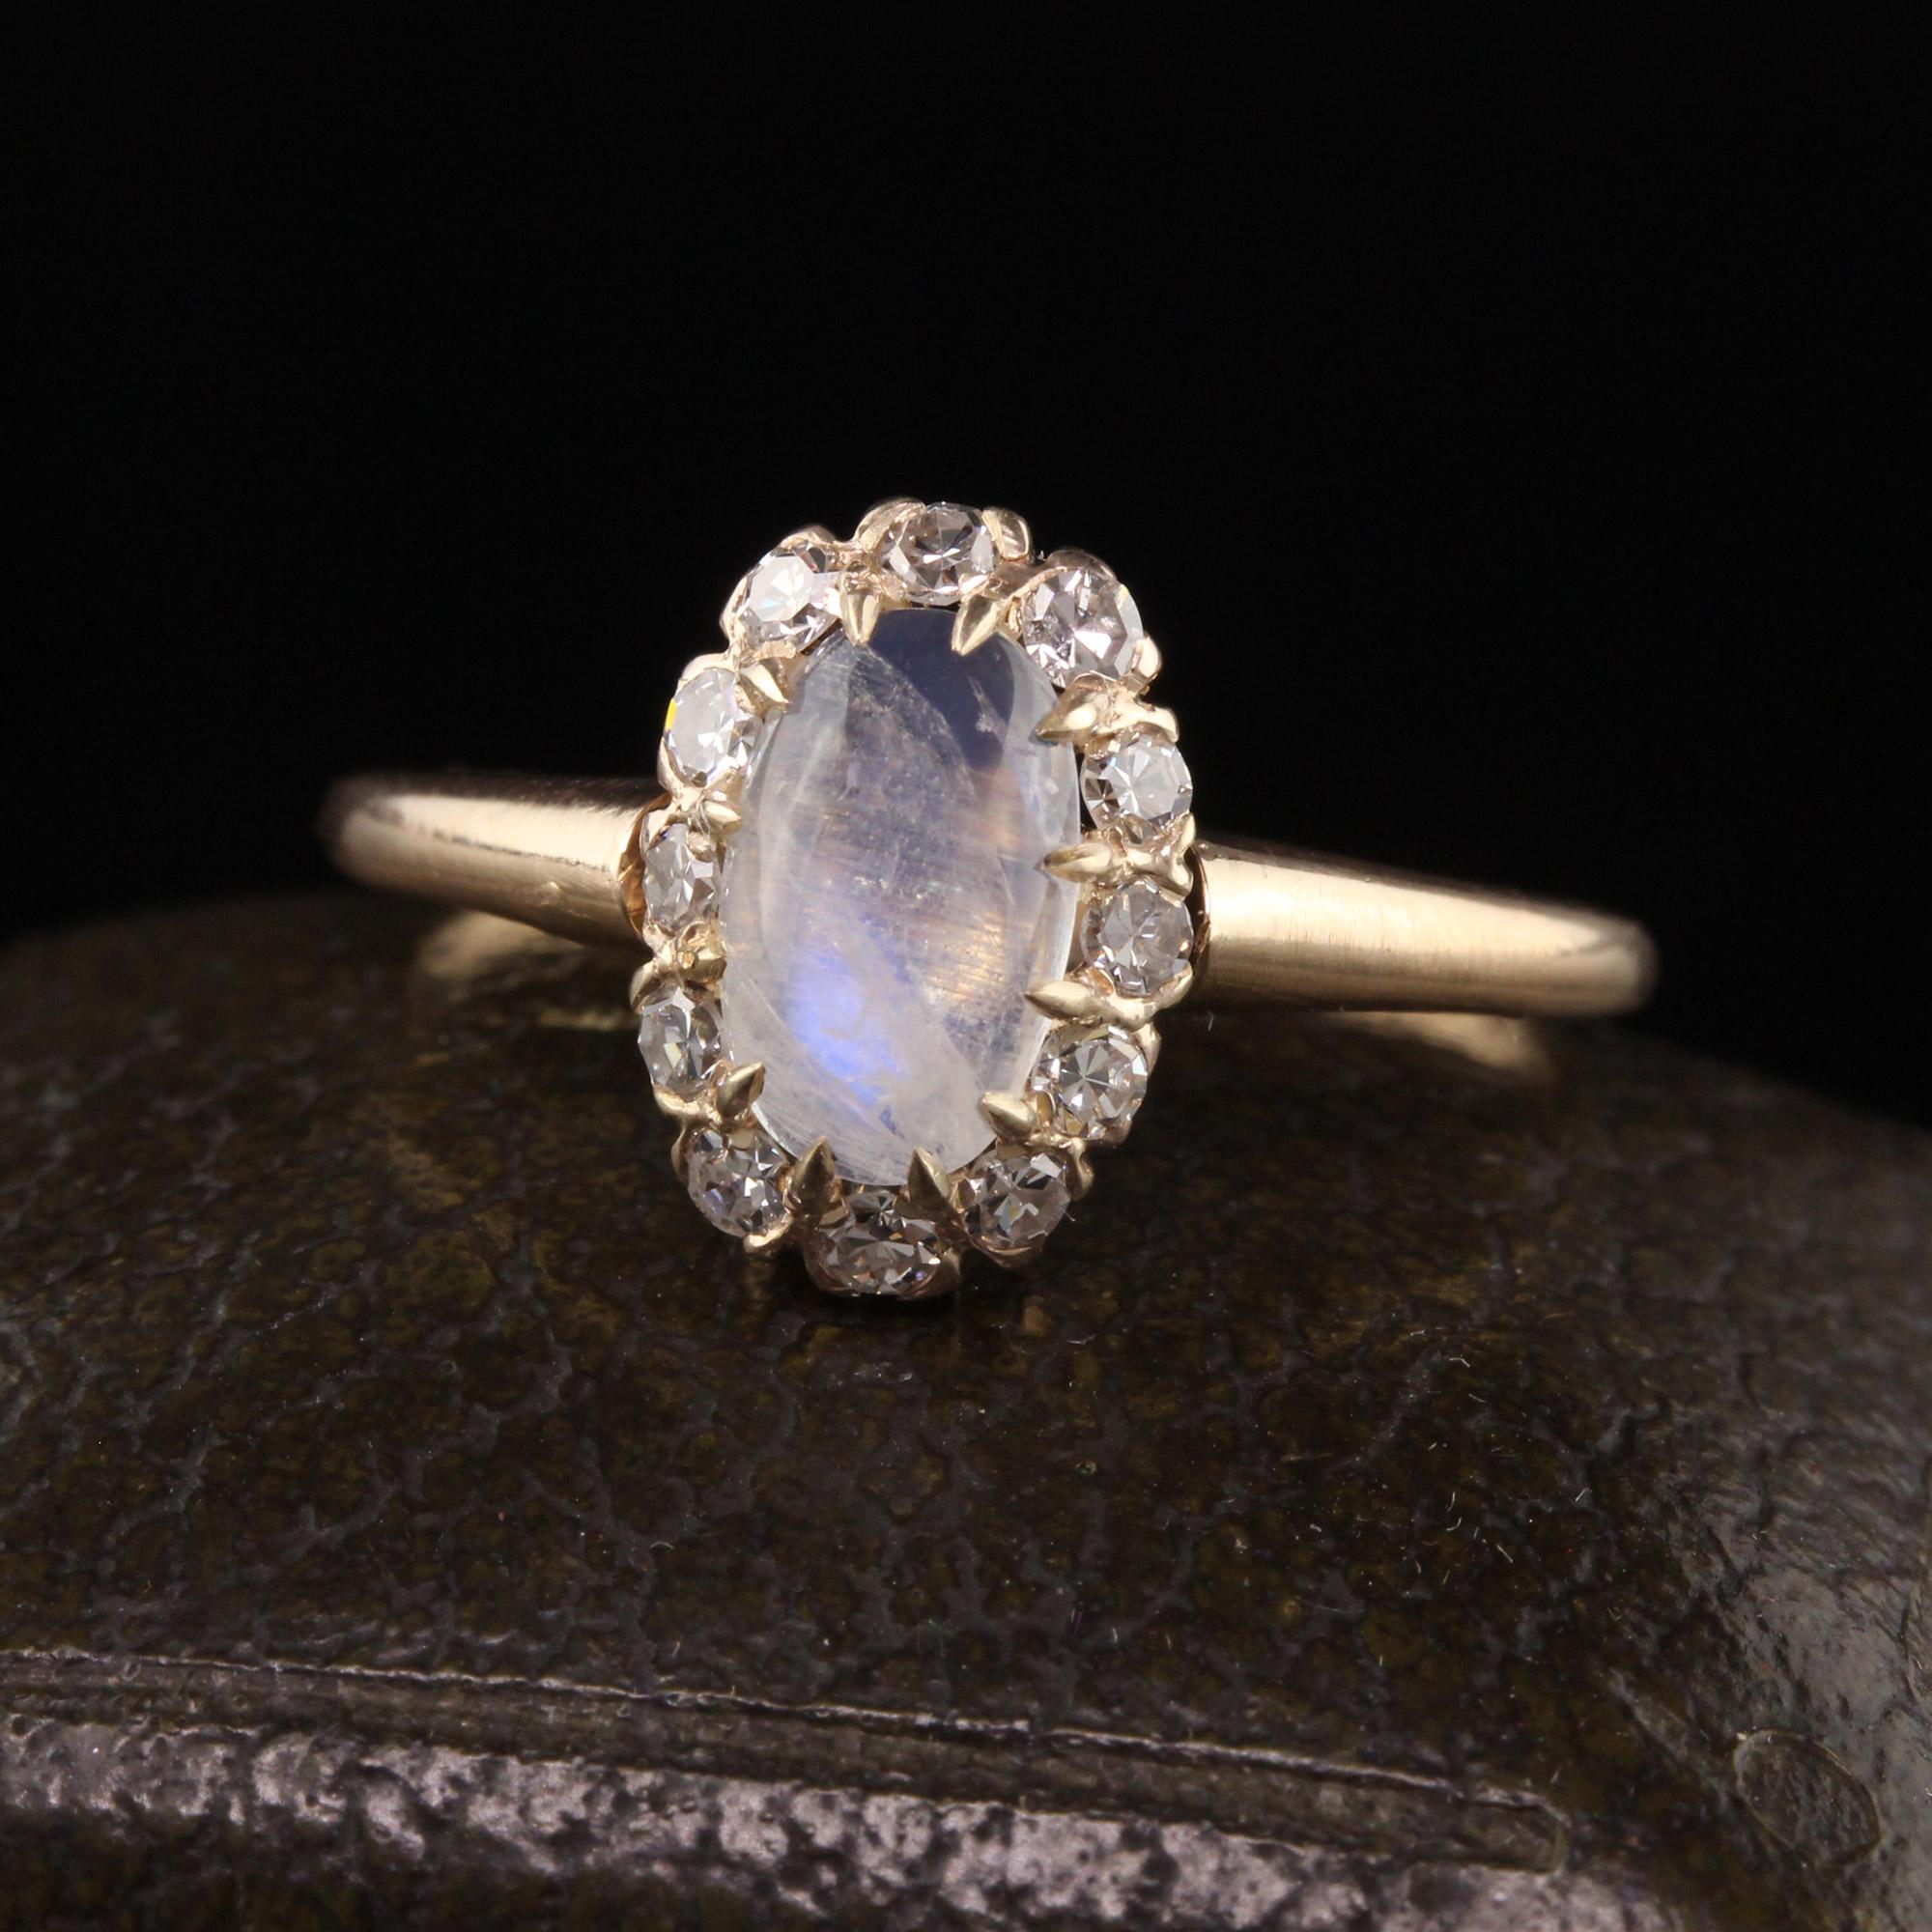 Beautiful Antique Victorian 14K Yellow Gold Moonstone Old European Diamond Ring. This beautiful ring is crafted in 14k yellow gold. The center holds a rainbow moonstone surrounded by old european cut diamonds.

Item #R1347

Metal: 14K Yellow